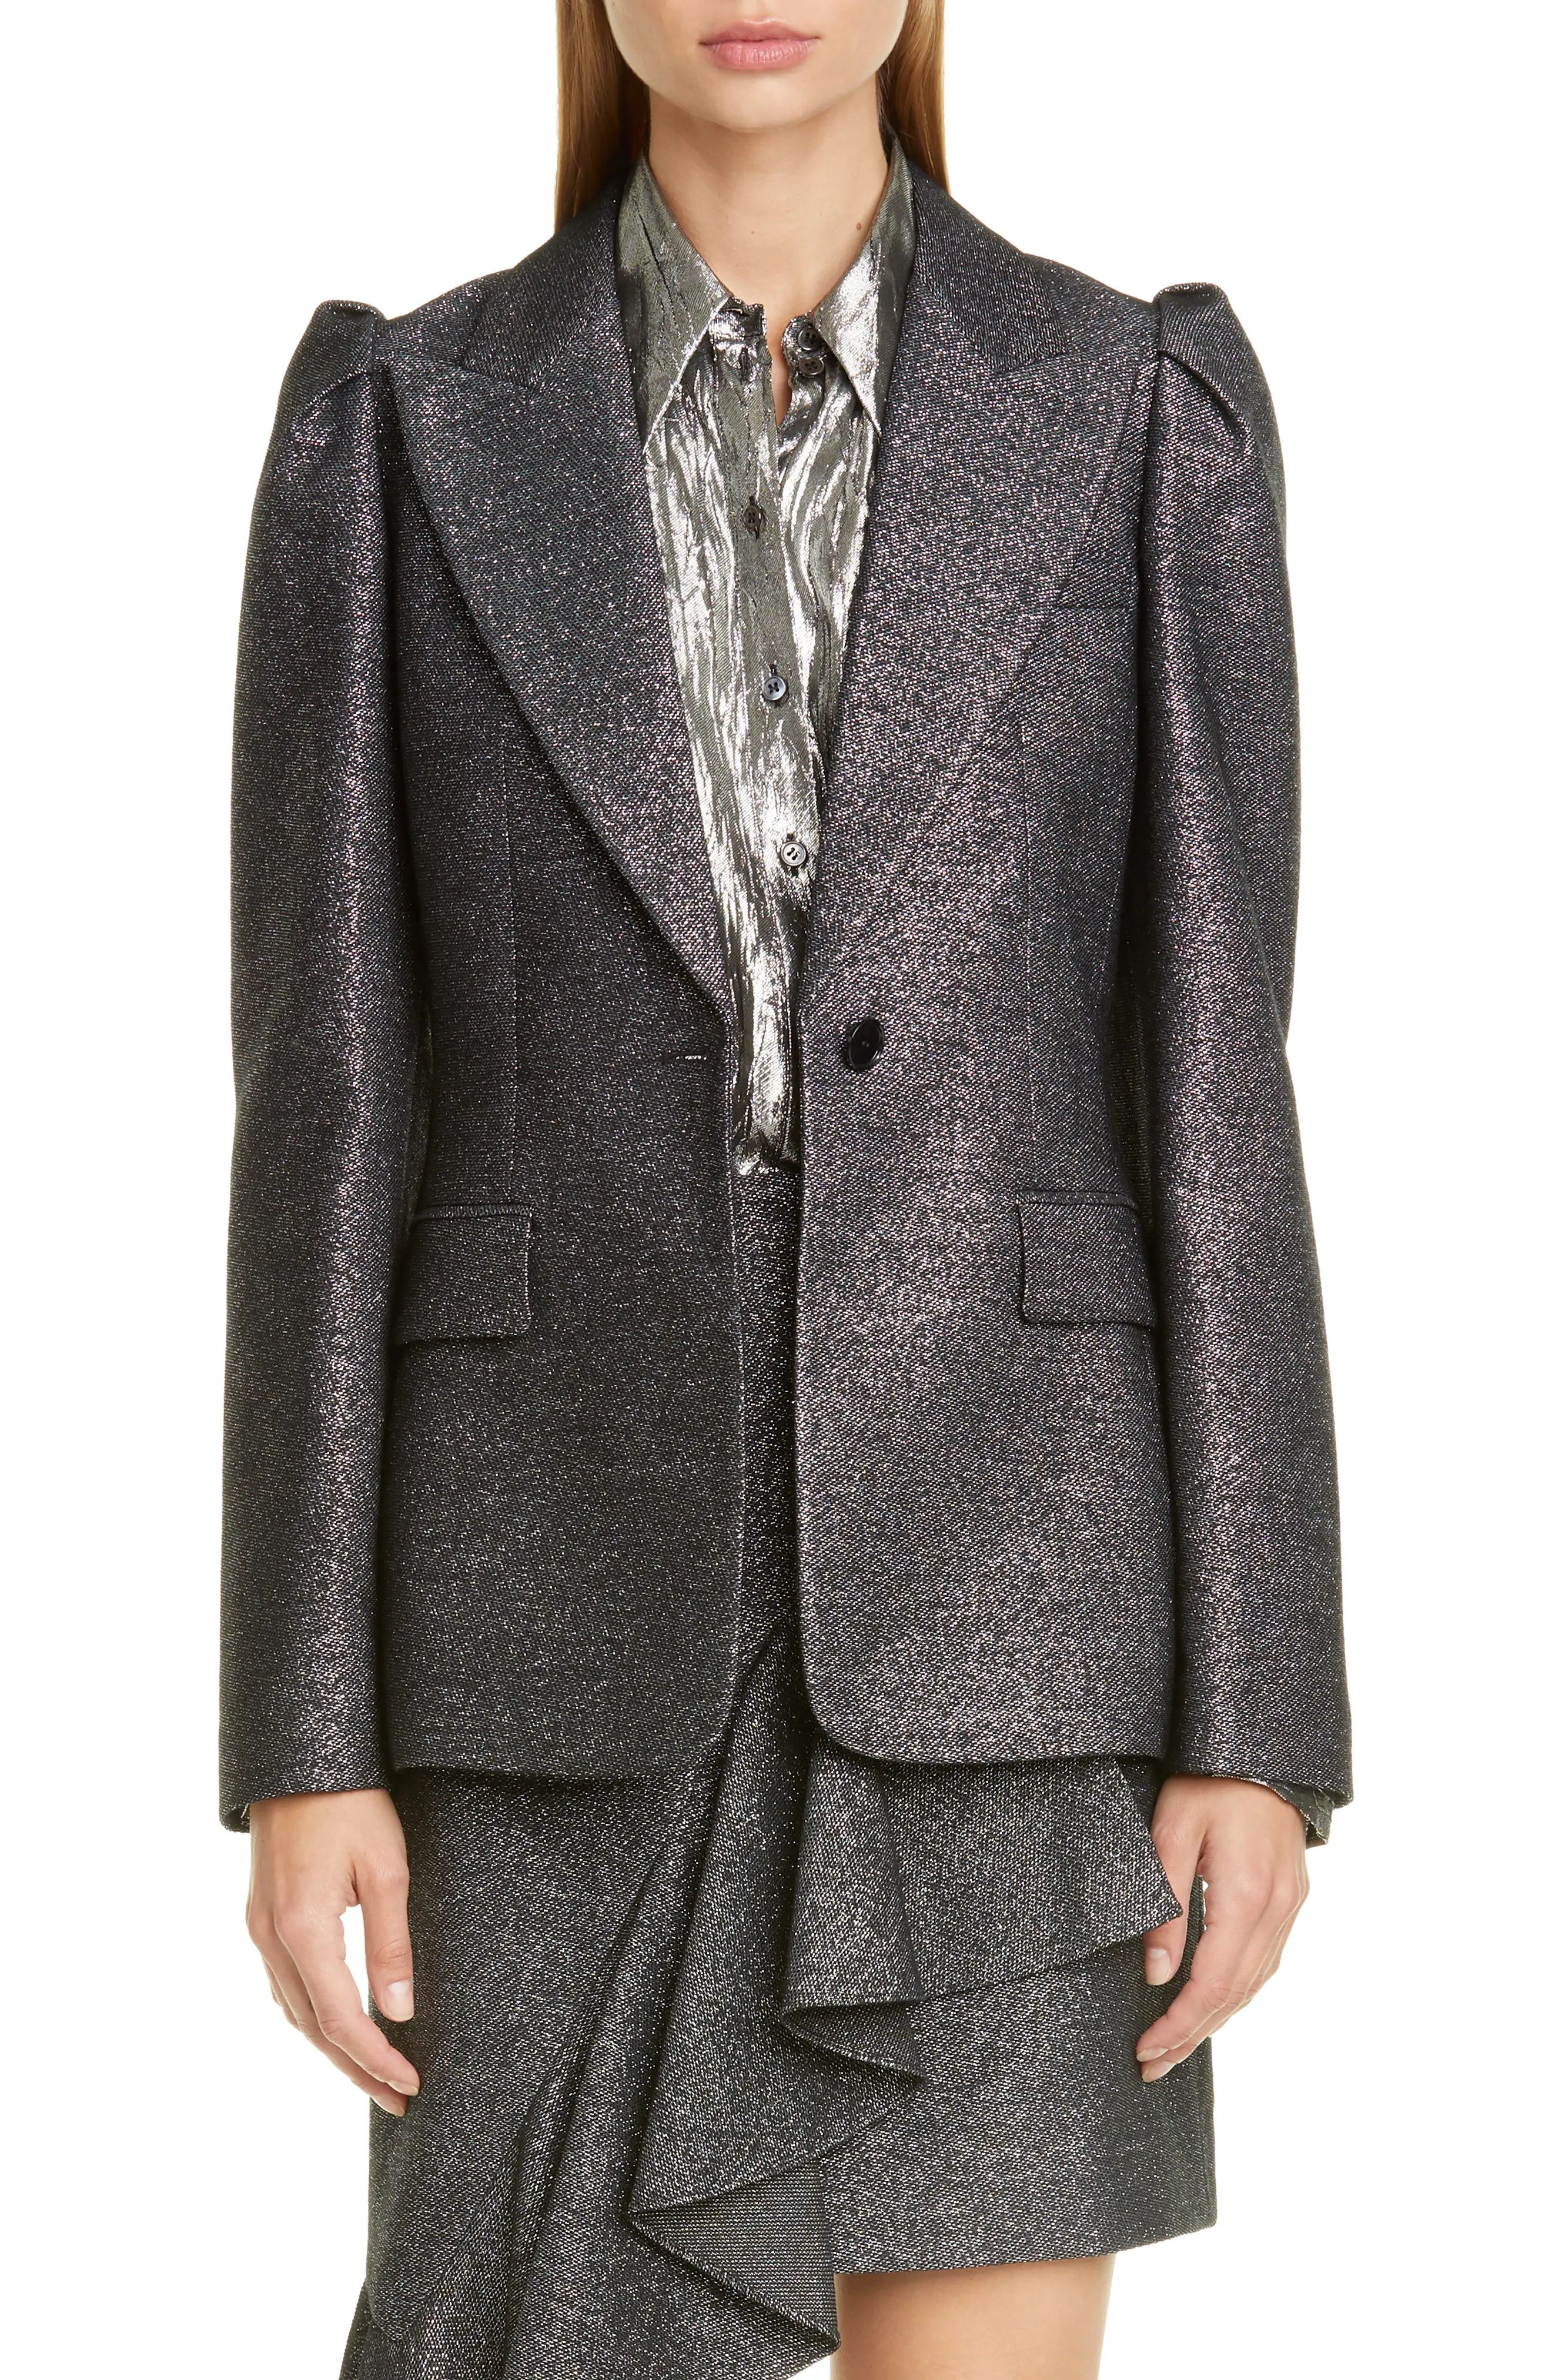 Michael Kors Collection Puff Sleeve Metallic Blazer in Silver/Black at Nordstrom, Size 12 | Nordstrom